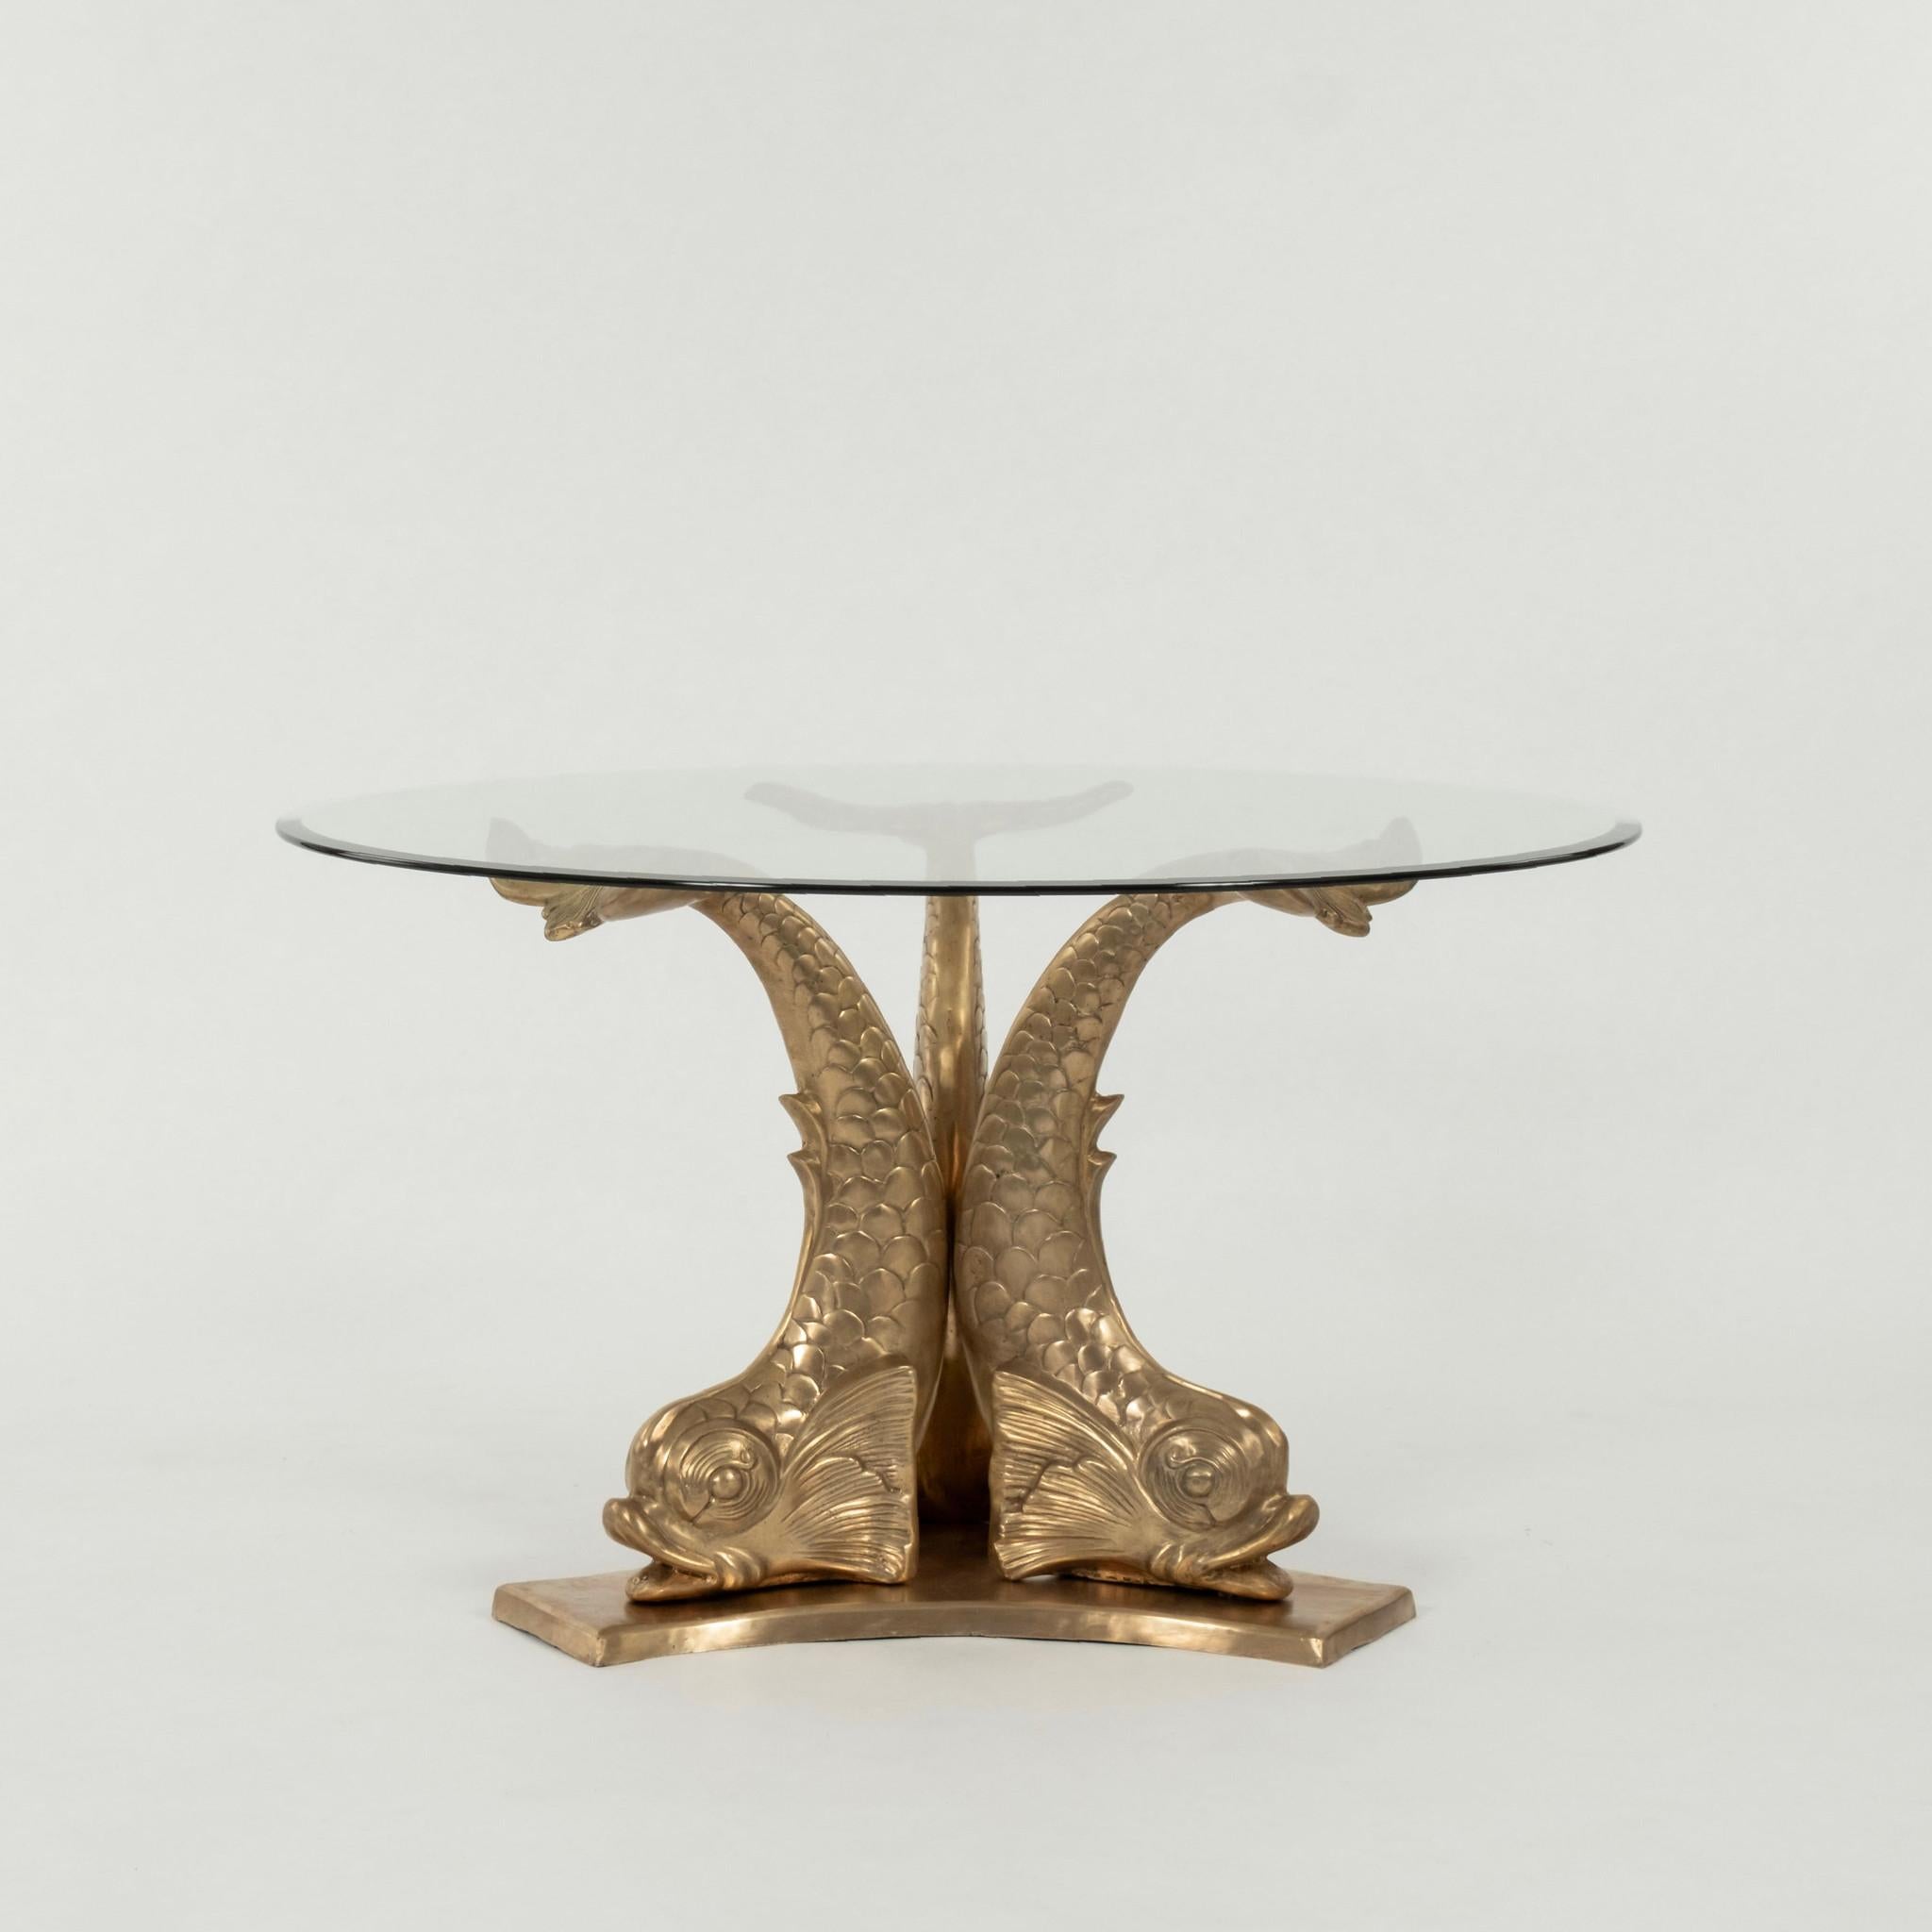 A chic vintage brass dolphin pedestal dining table with 48